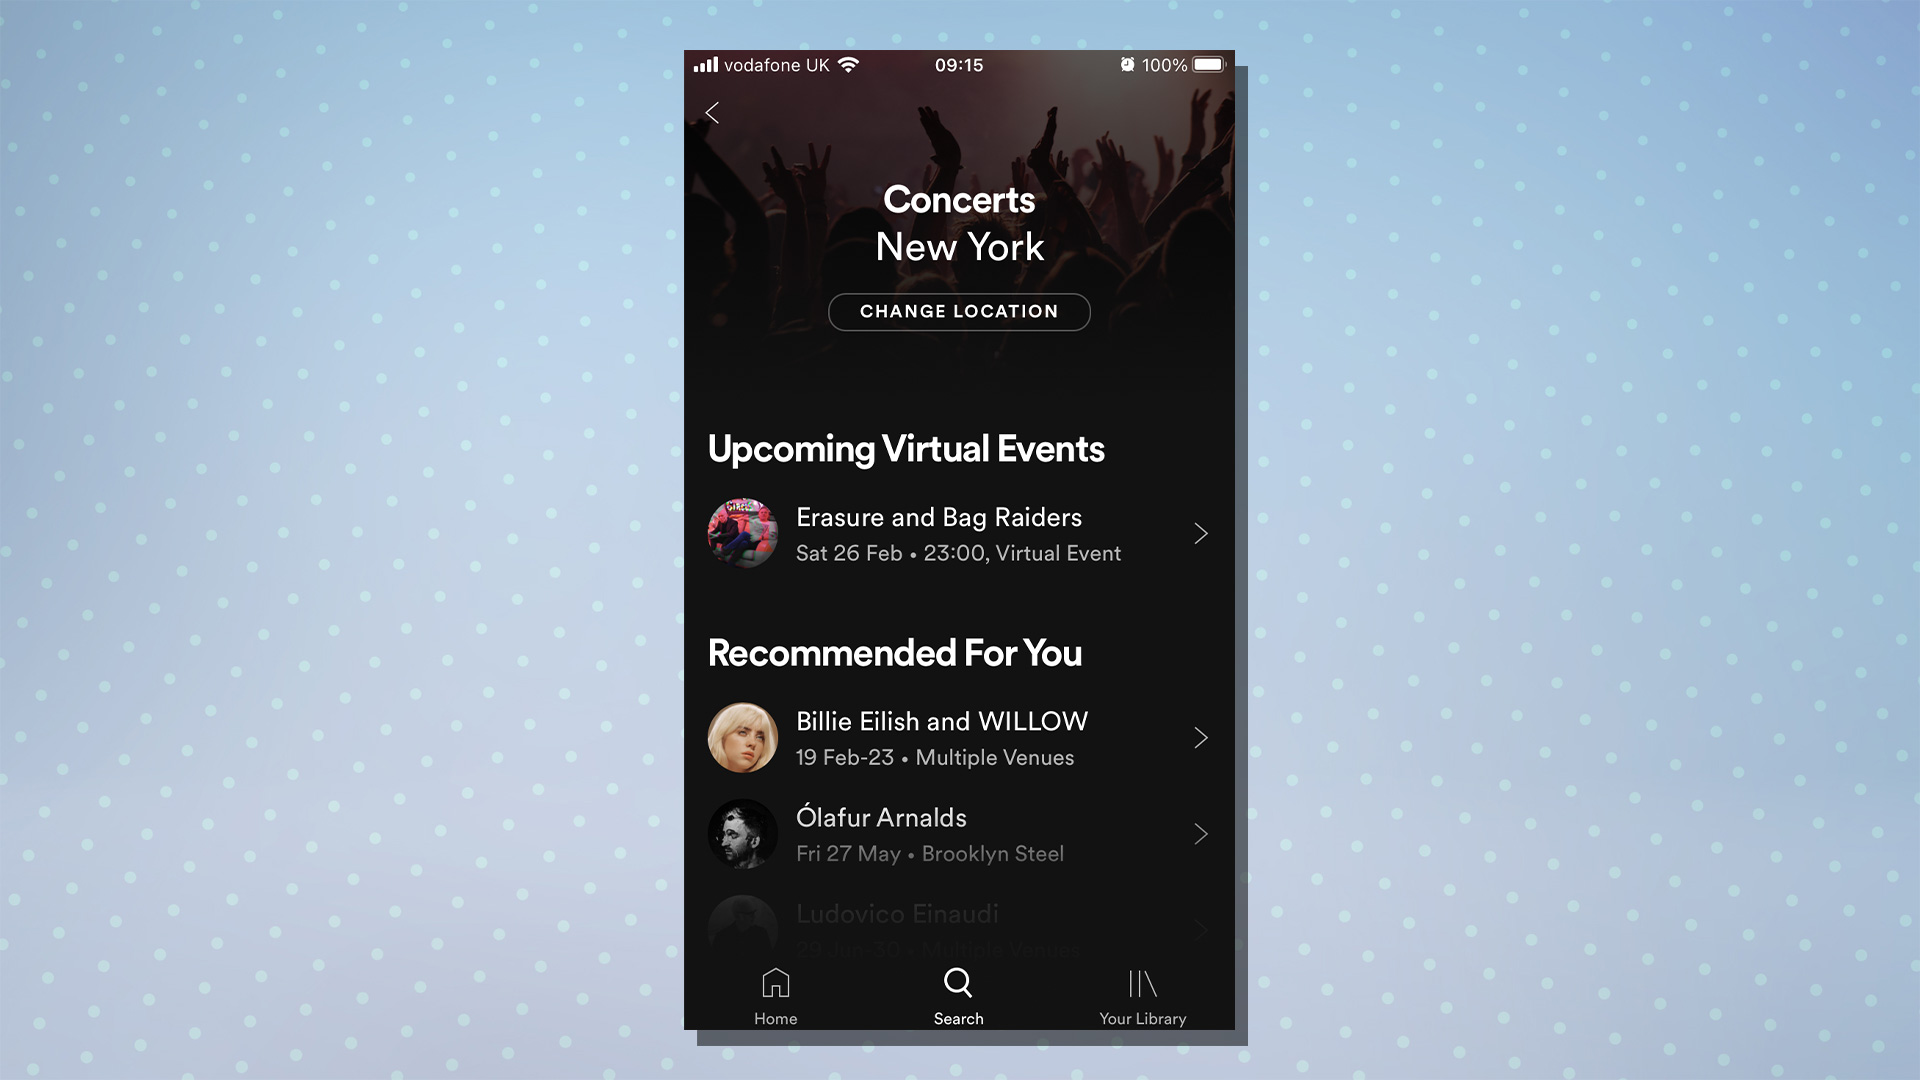 A screenshot from Spotify showing the concert tickets feature